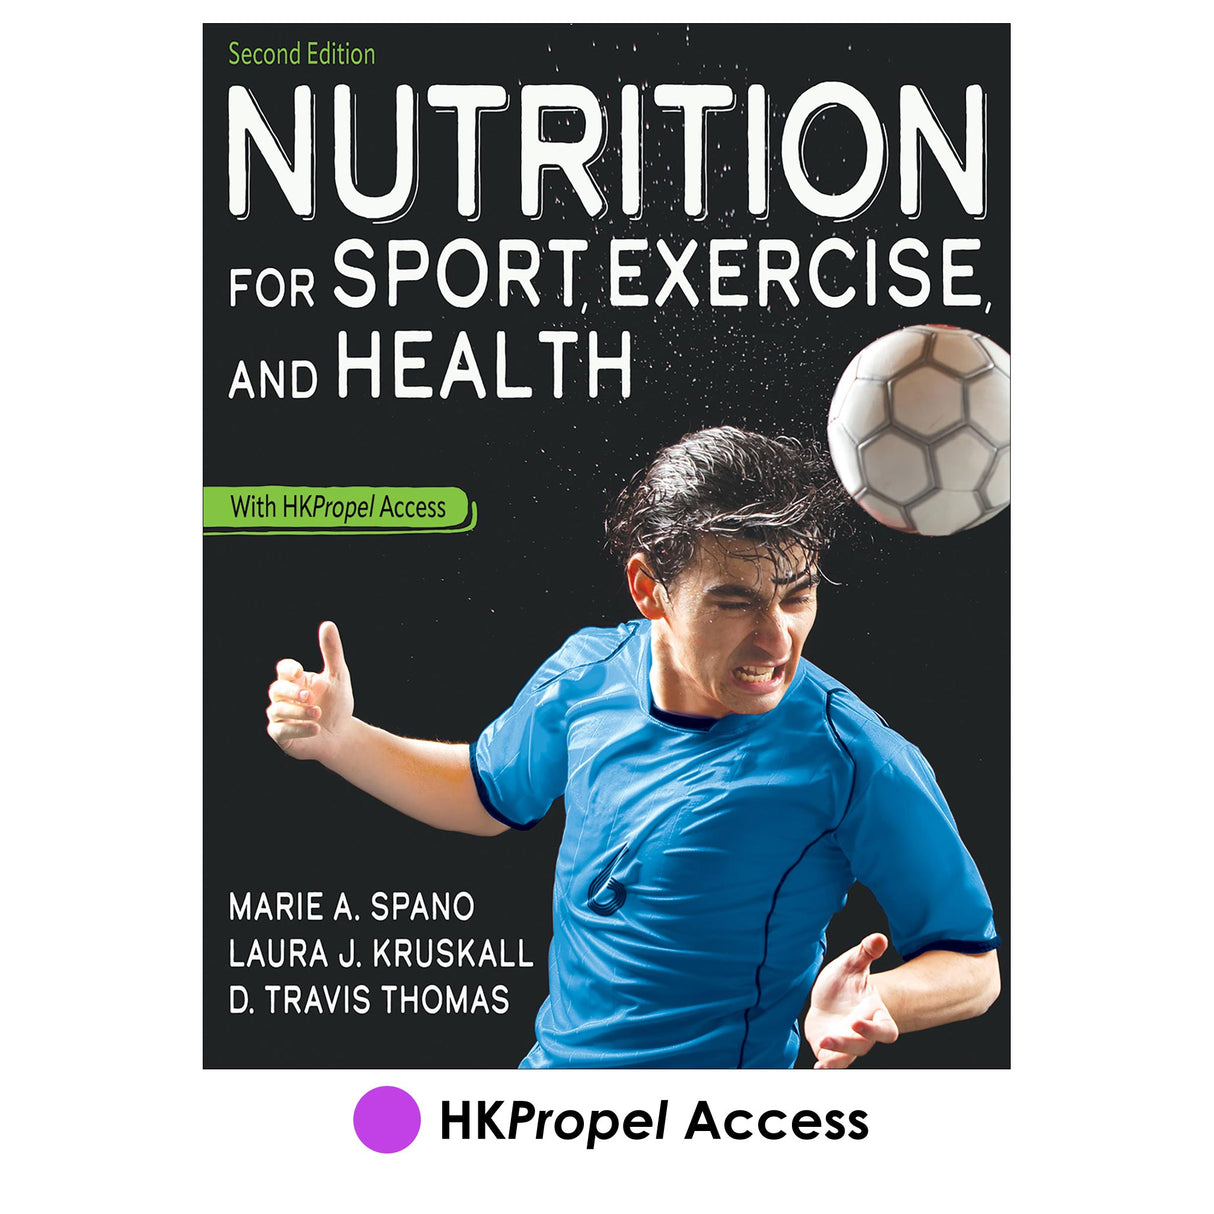 Nutrition for Sport, Exercise, and Health 2nd Edition HKPropel Access